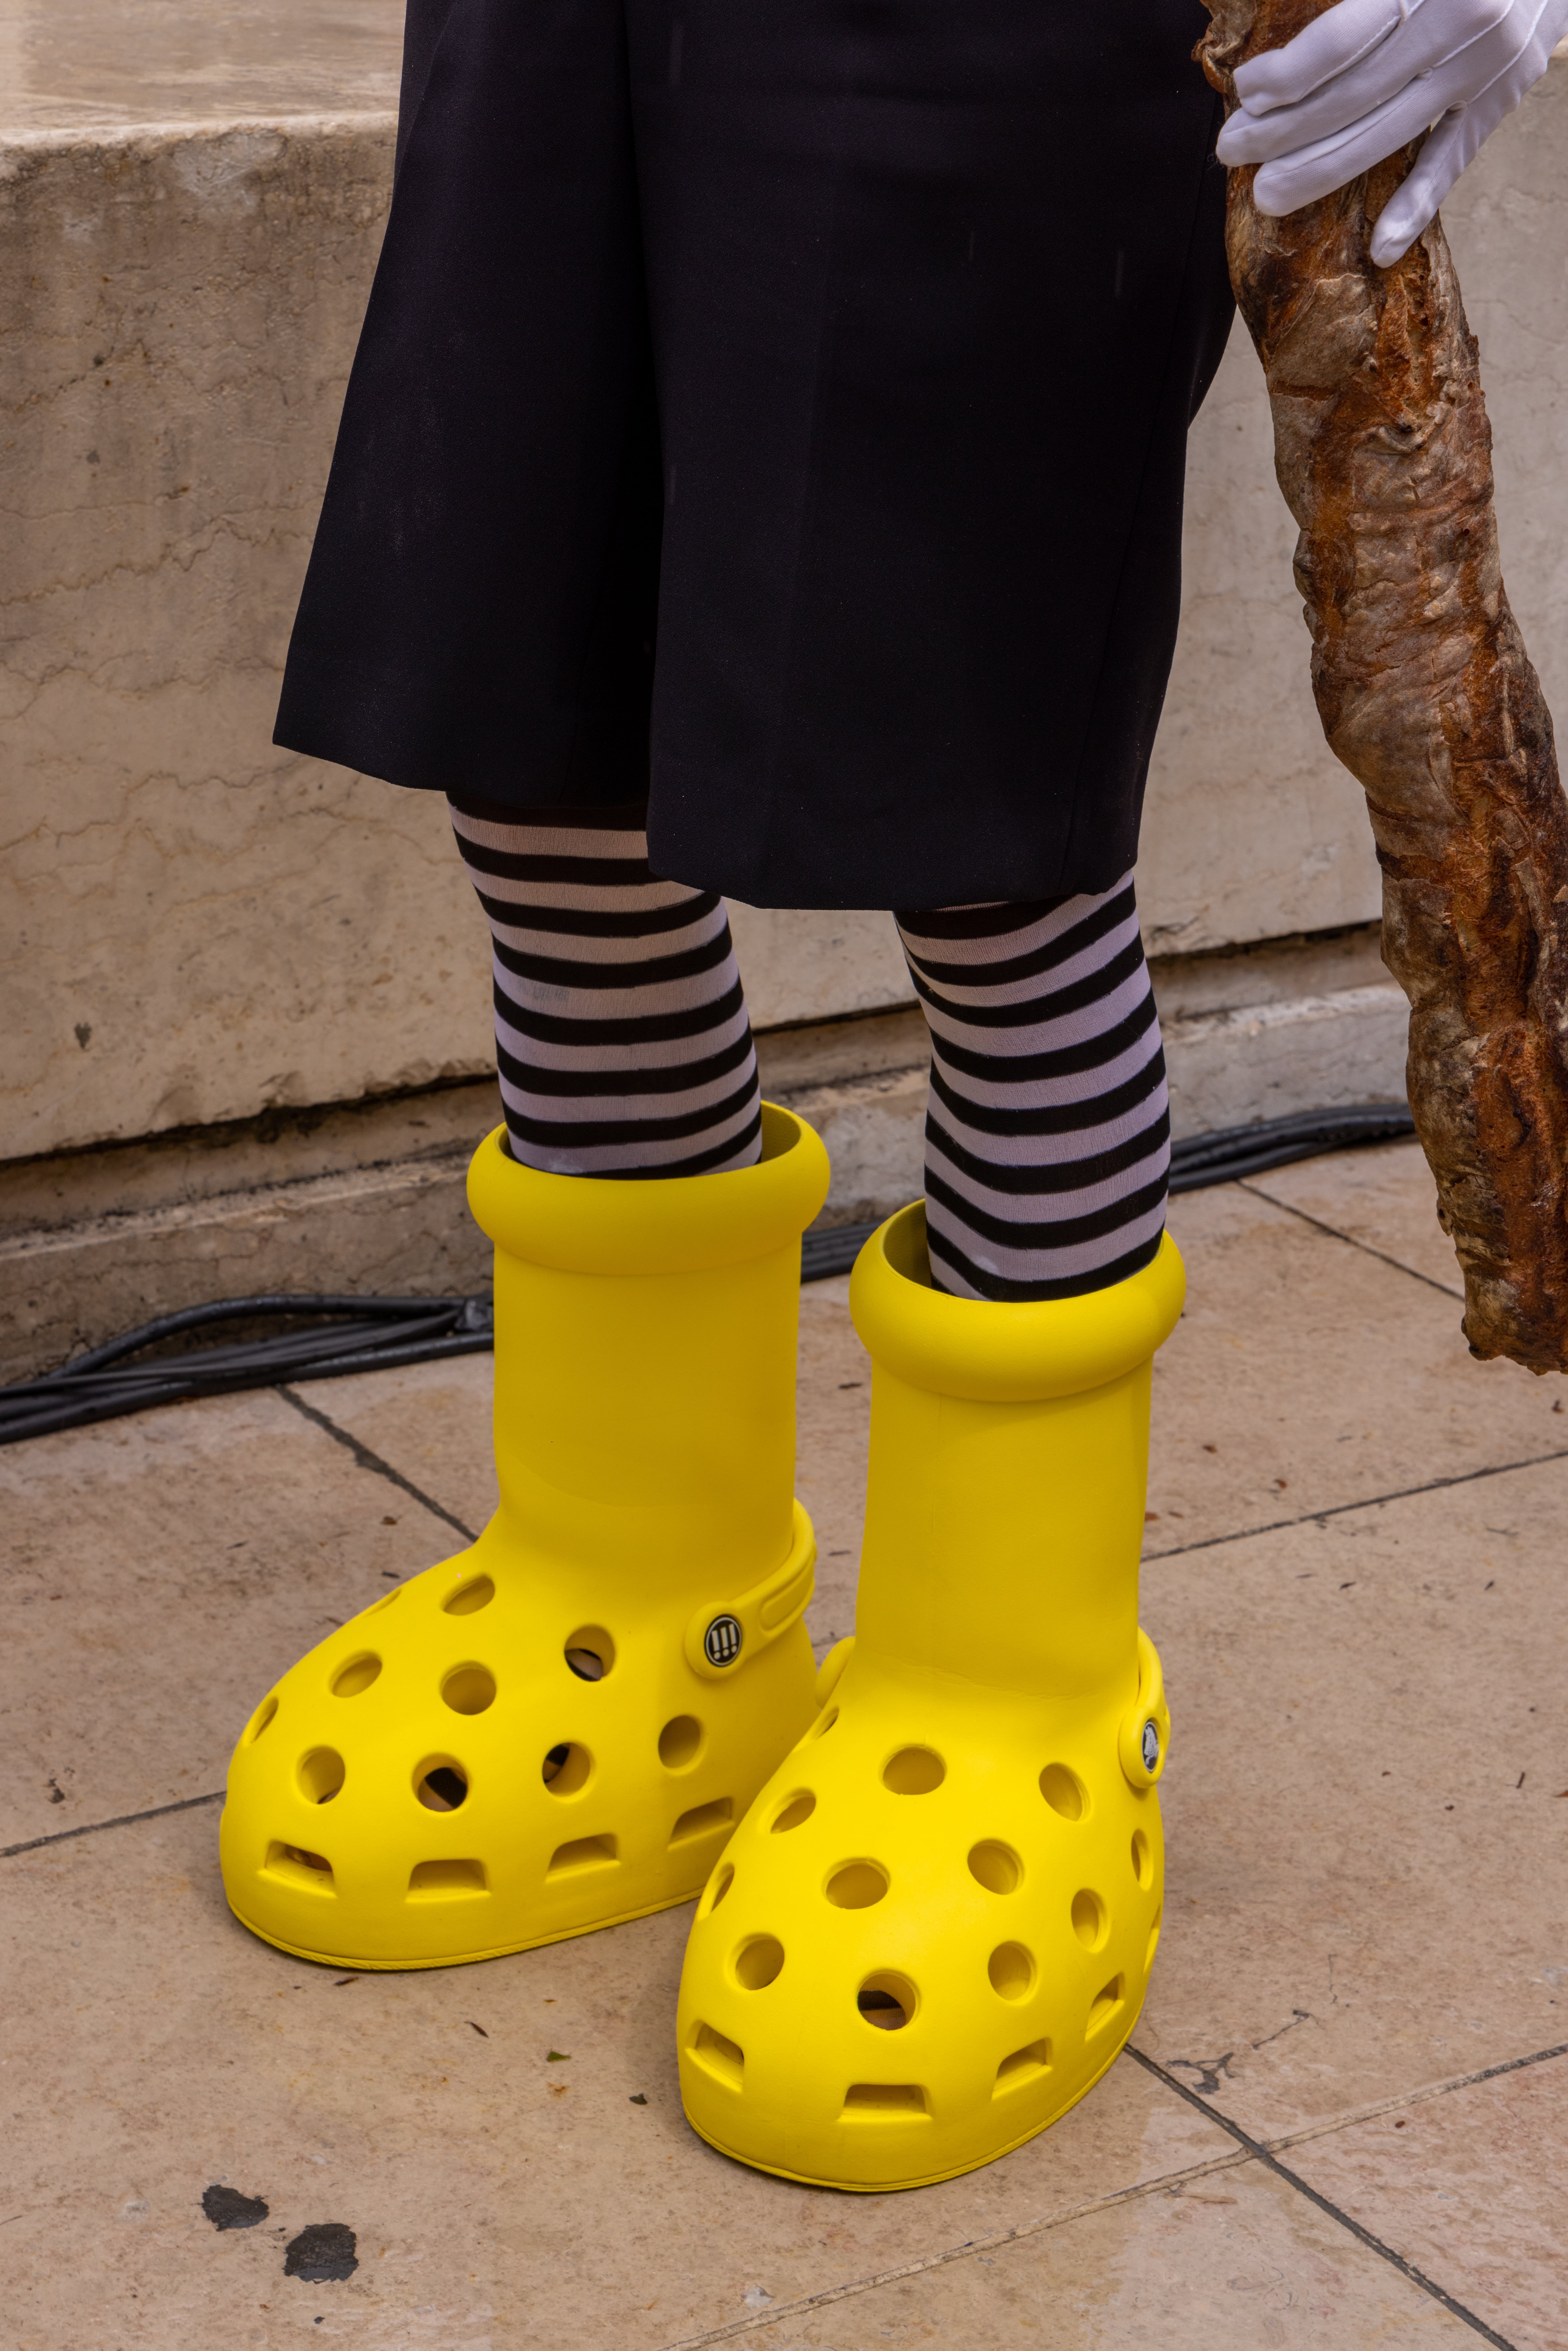 MSCHF and Crocs Release Big Yellow Boots Collaboration | POPSUGAR